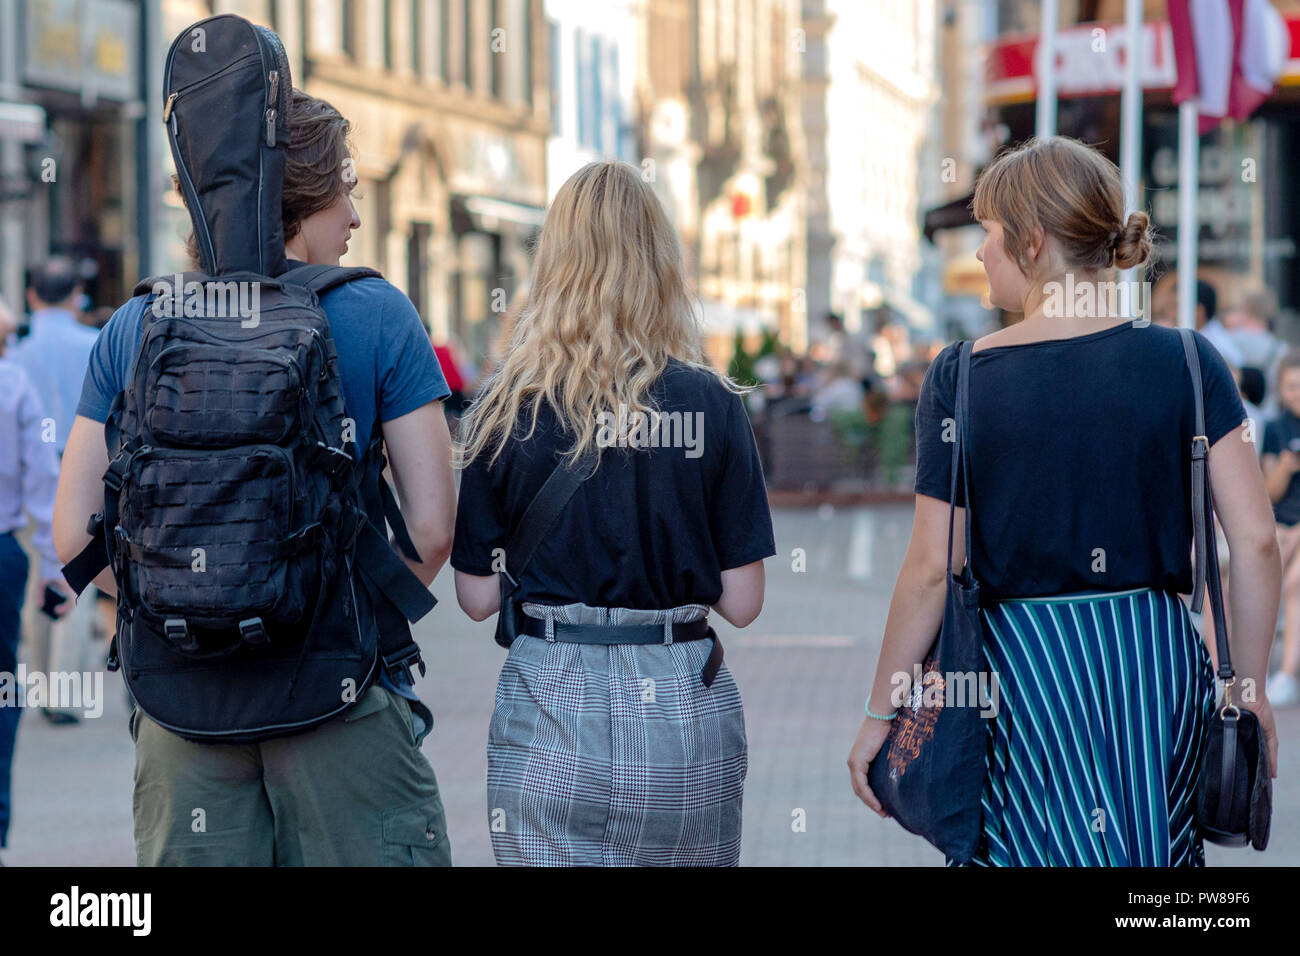 RIGA, LATVIA - JULY 26, 2018: A man and two women walk along the streets of the city. View from the back. Stock Photo